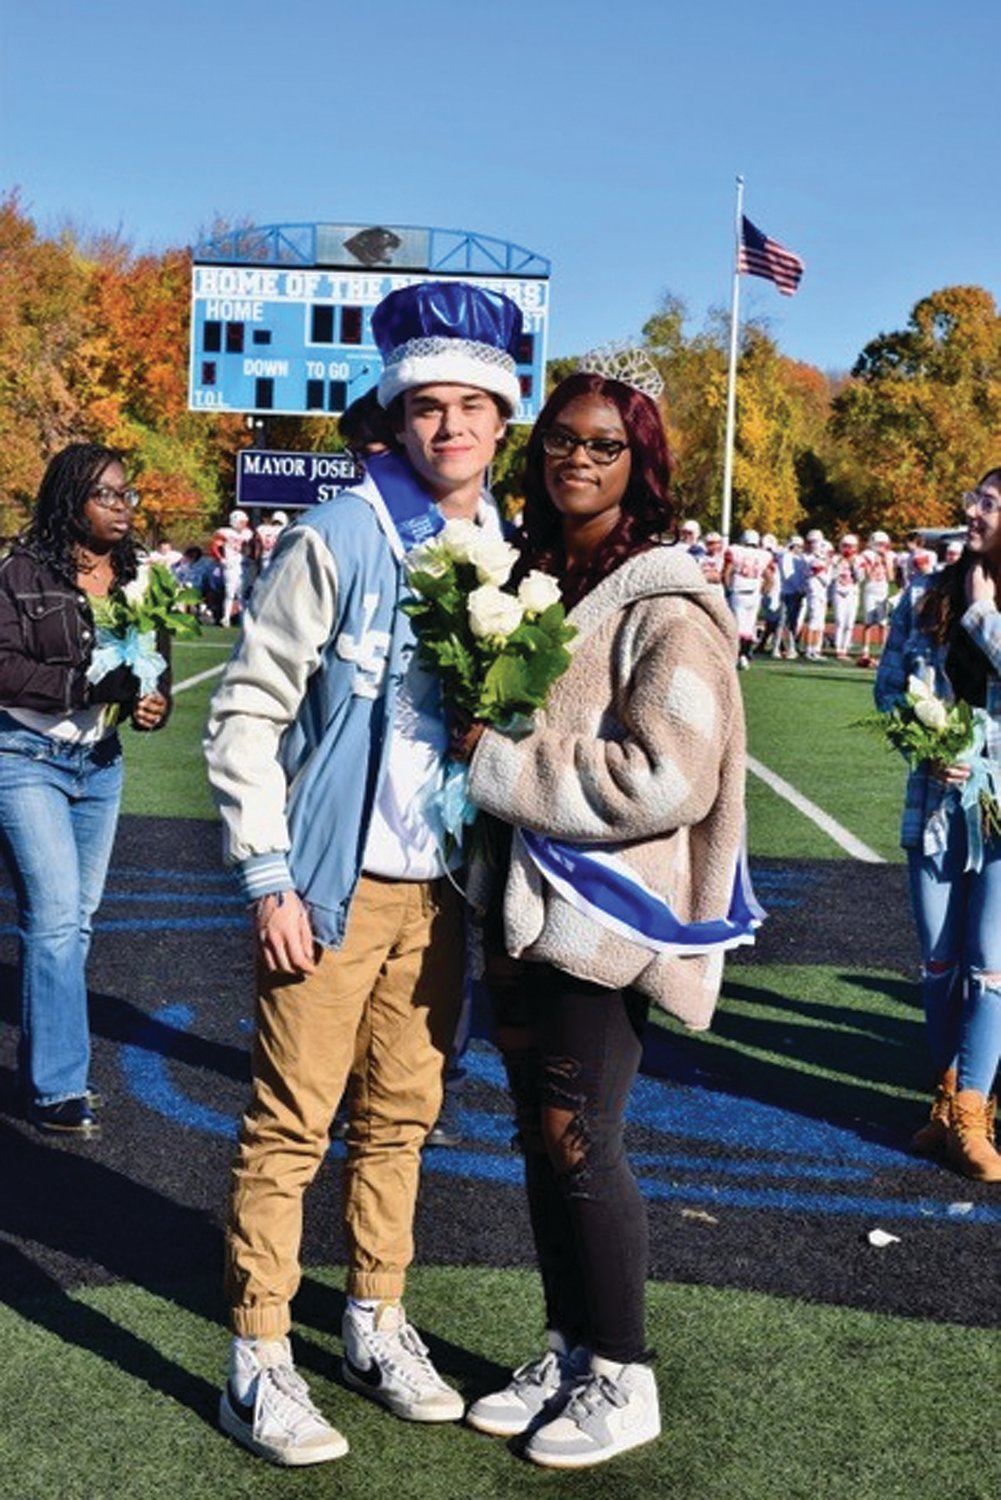 POPULAR PANTHERS: Jacob Muller and Taylor Powell were crowned King and Queen of Johnston High’s 2022 Homecoming.